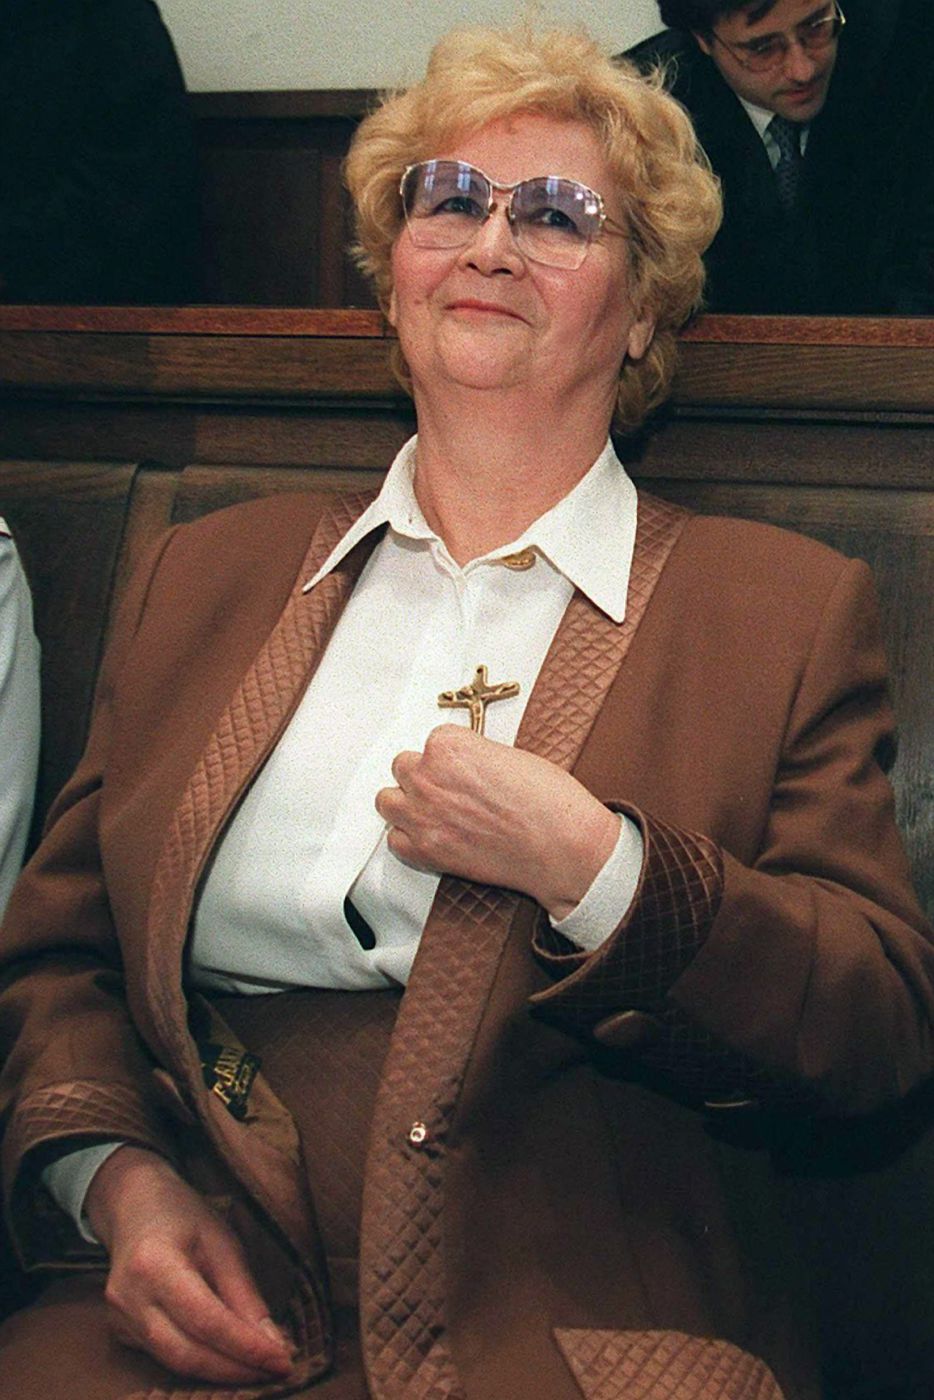 File picture dated 10 February 1997 of Elfriede Blauensteiner holding up a crucifix prior to her trial at the district court in the Austrian town of Krems. The 70-year-old "Black Widow" already jailed for life for murder, goes on trial Wednesday, 18 April 2001, accused of two more killings including that of her husband. dpa +++ dpa-Bildfunk +++